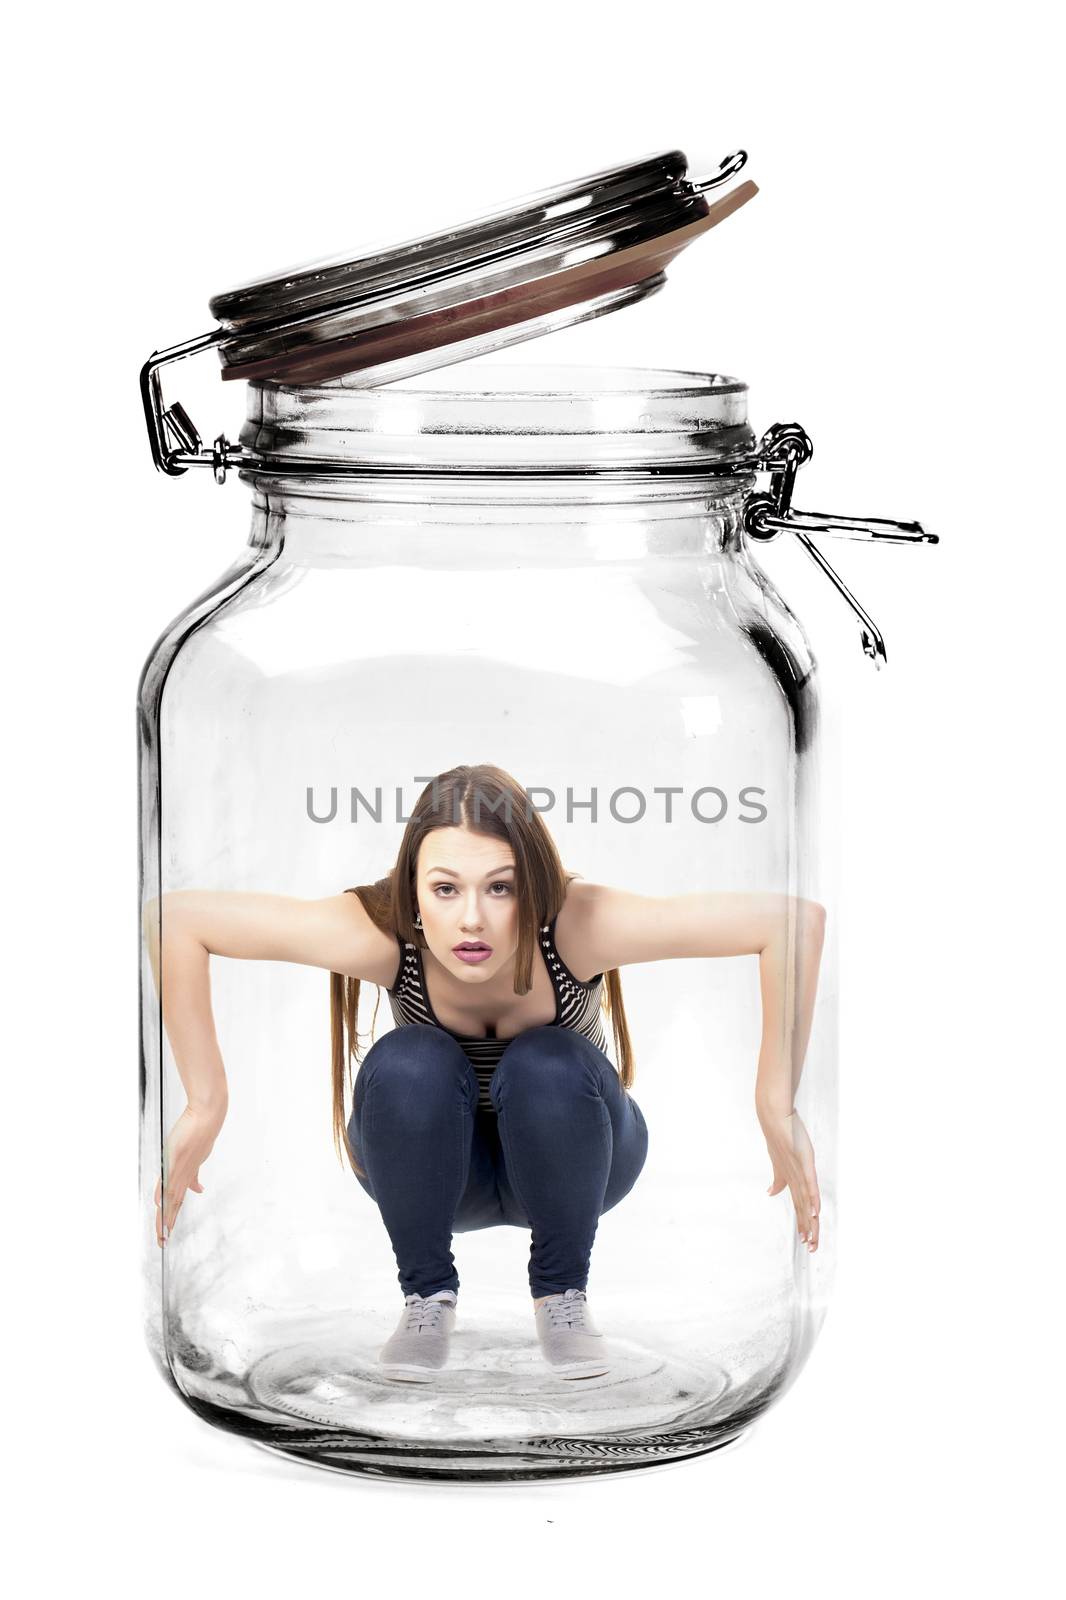 Woman trapped in glass jar.